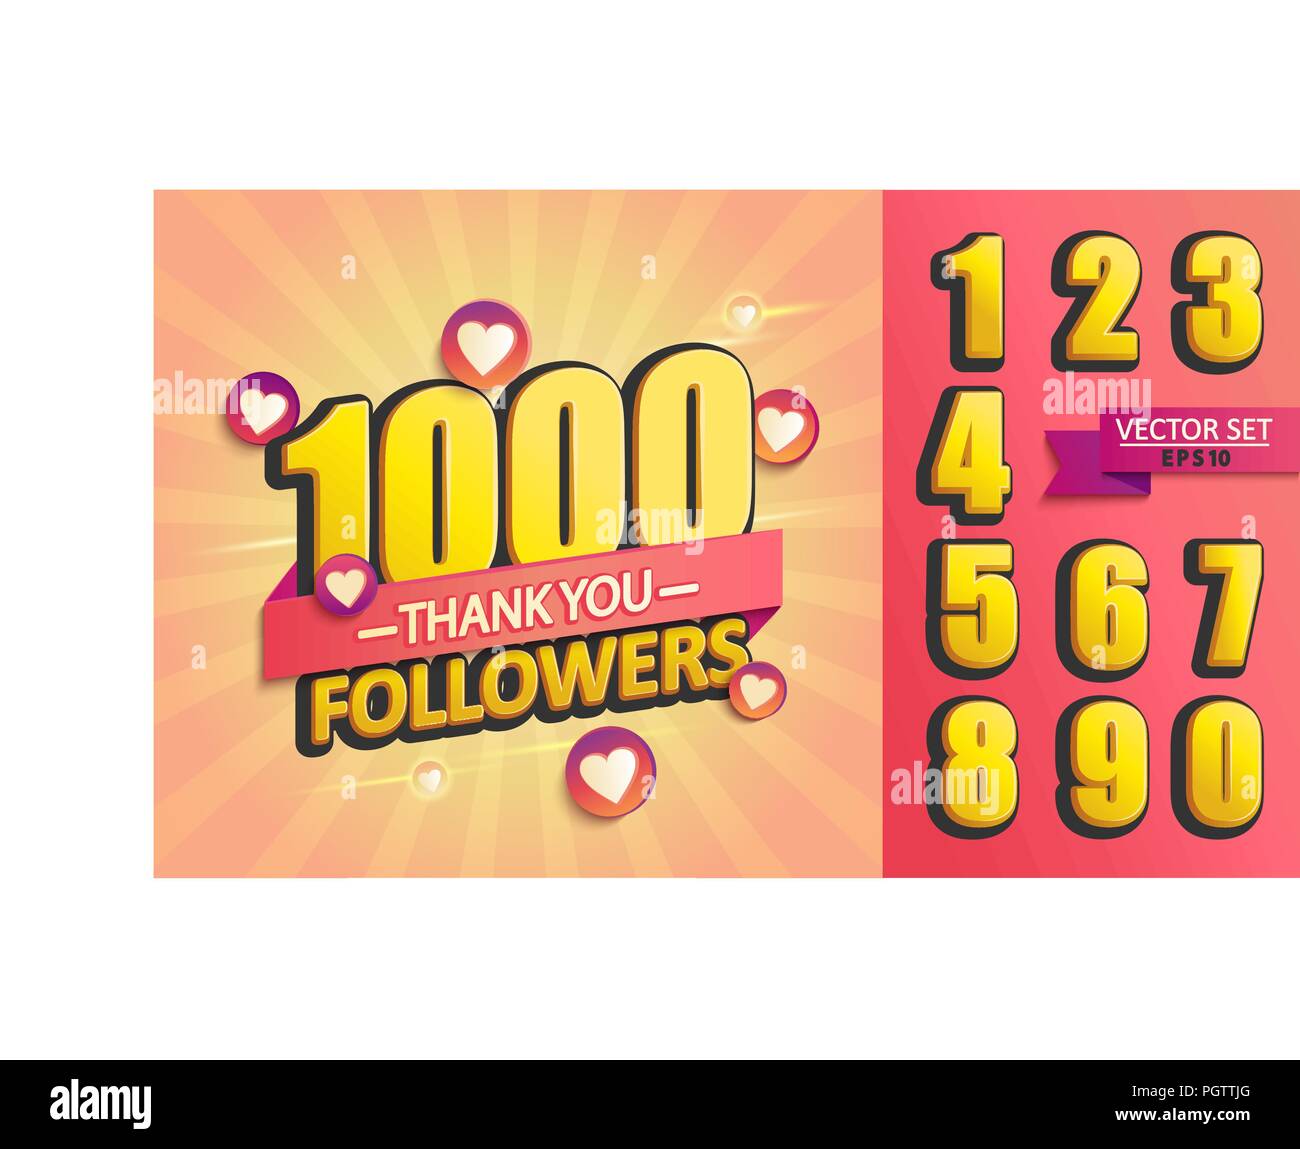 Set of numbers for Thanks followers design.Thank you followers congratulation card. Vector illustration for Social Networks. Web user or blogger celebrates and tweets a large number of subscribers. Stock Vector